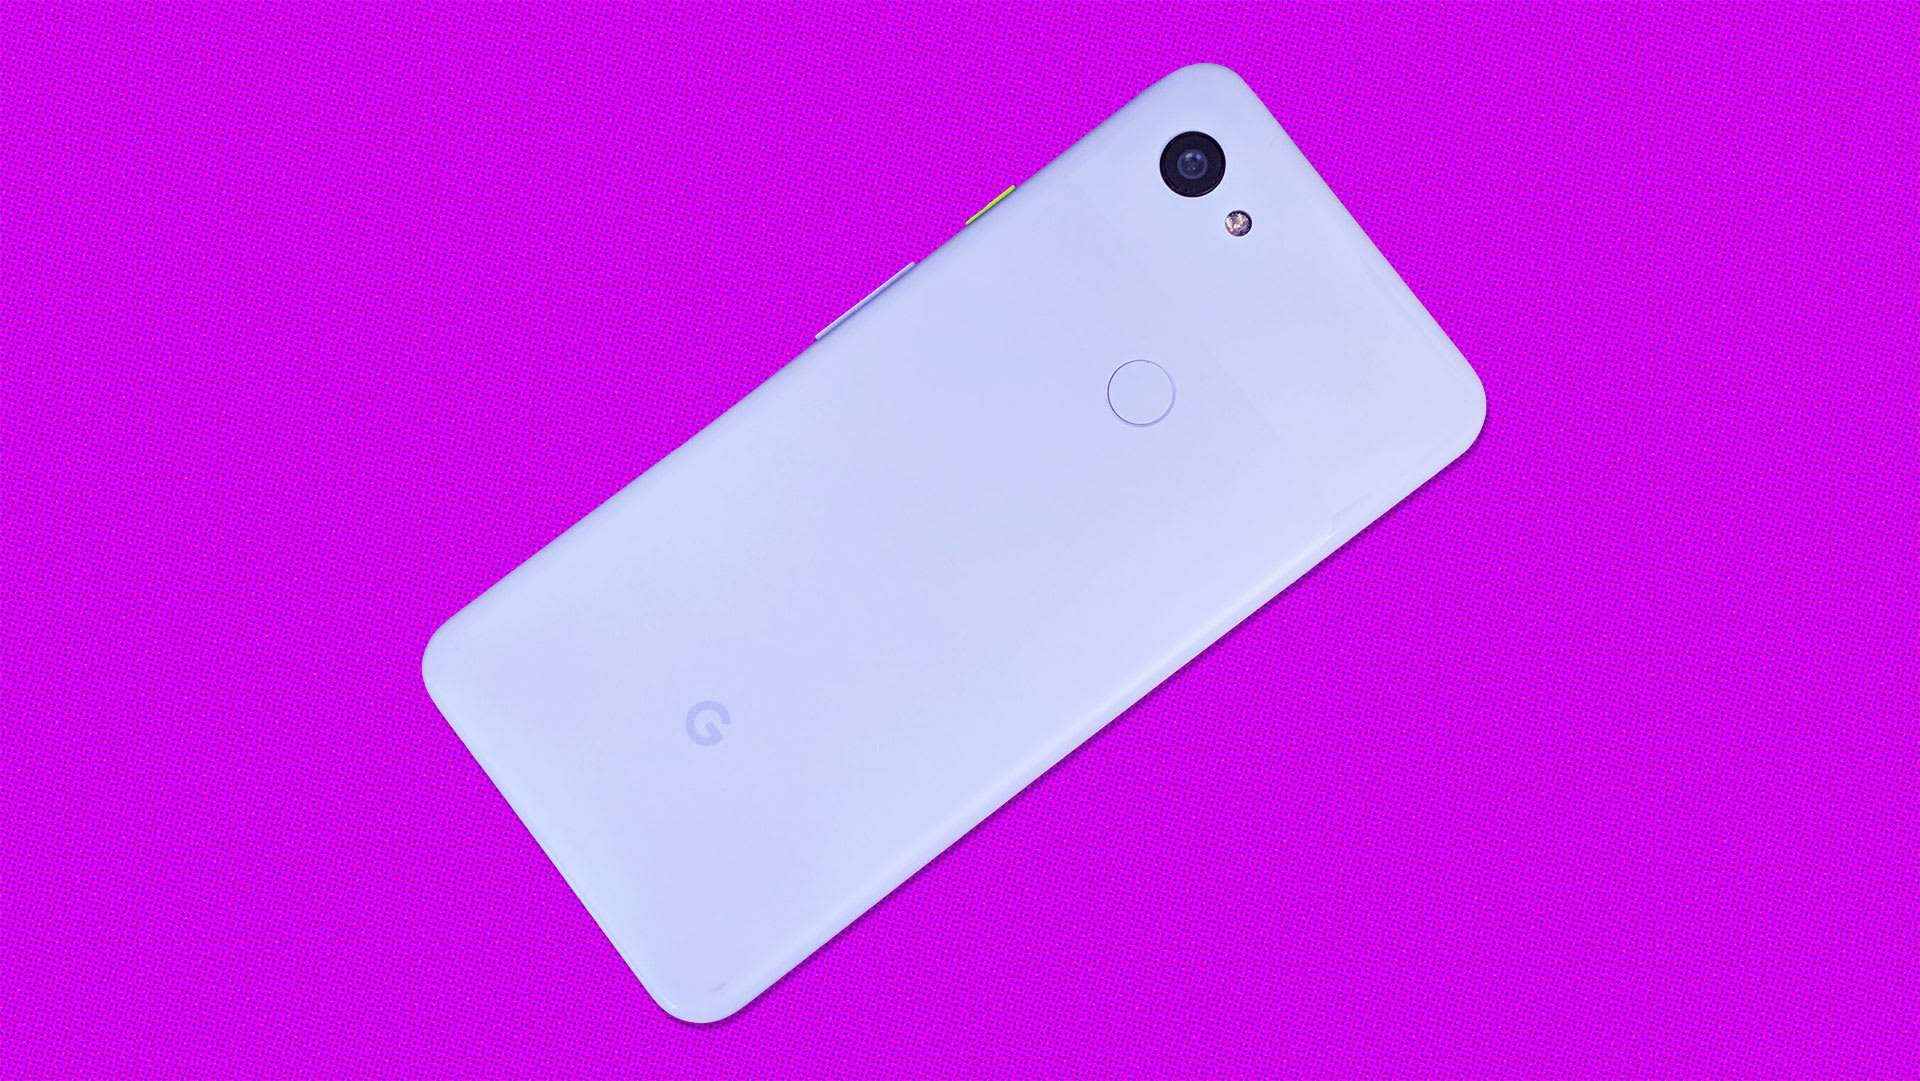 This is a love letter to Google's Purple-ish Pixel 3A smartphone ...